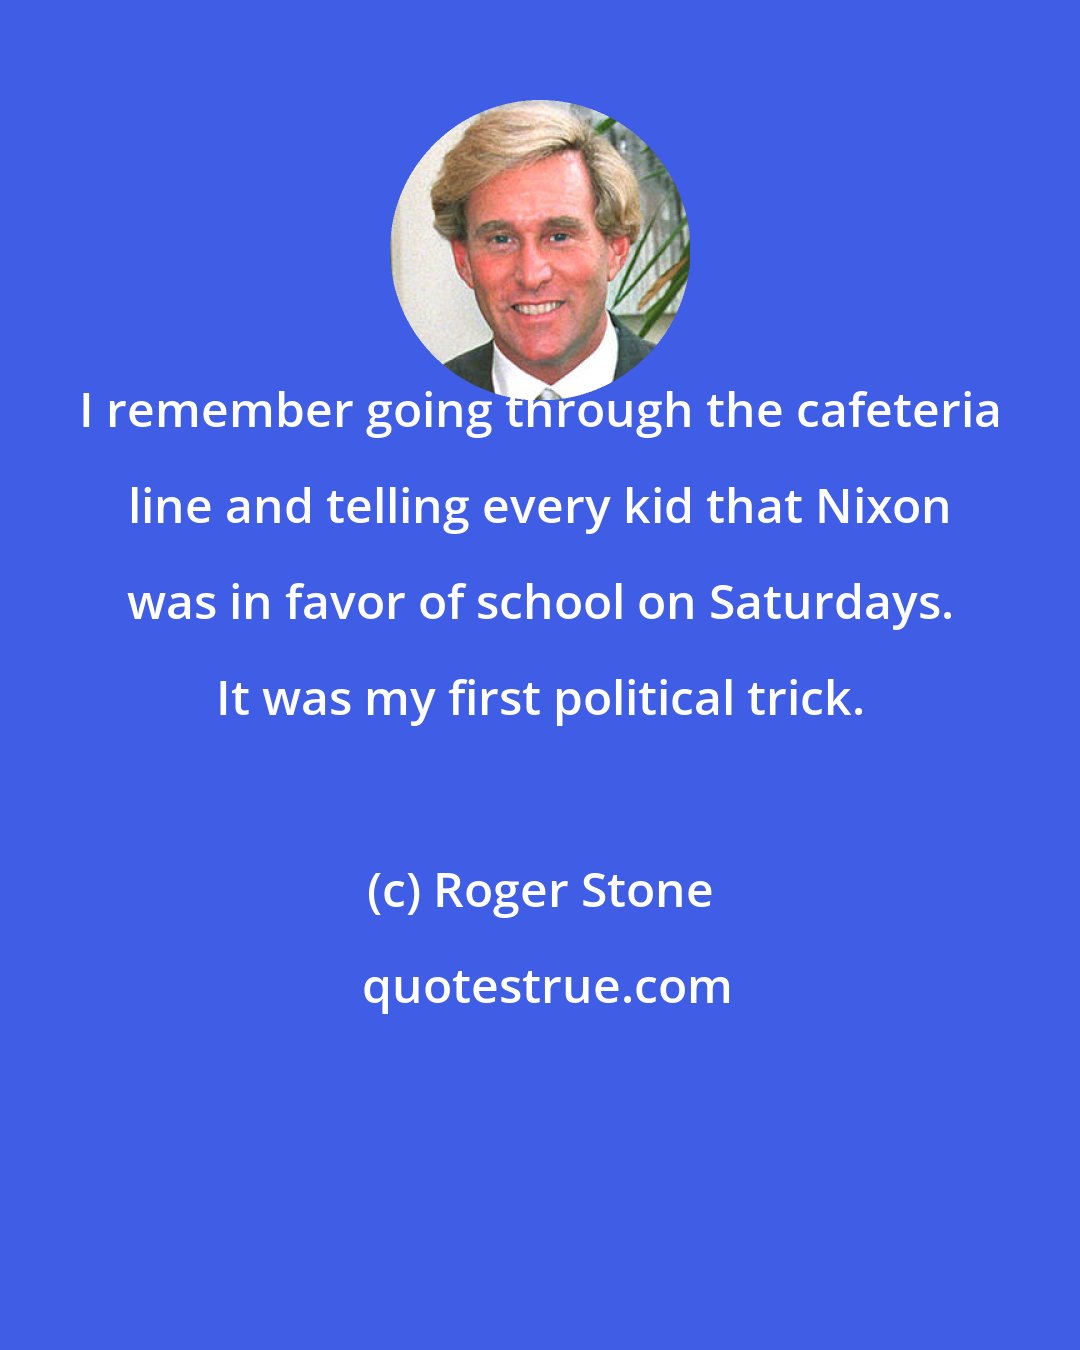 Roger Stone: I remember going through the cafeteria line and telling every kid that Nixon was in favor of school on Saturdays. It was my first political trick.